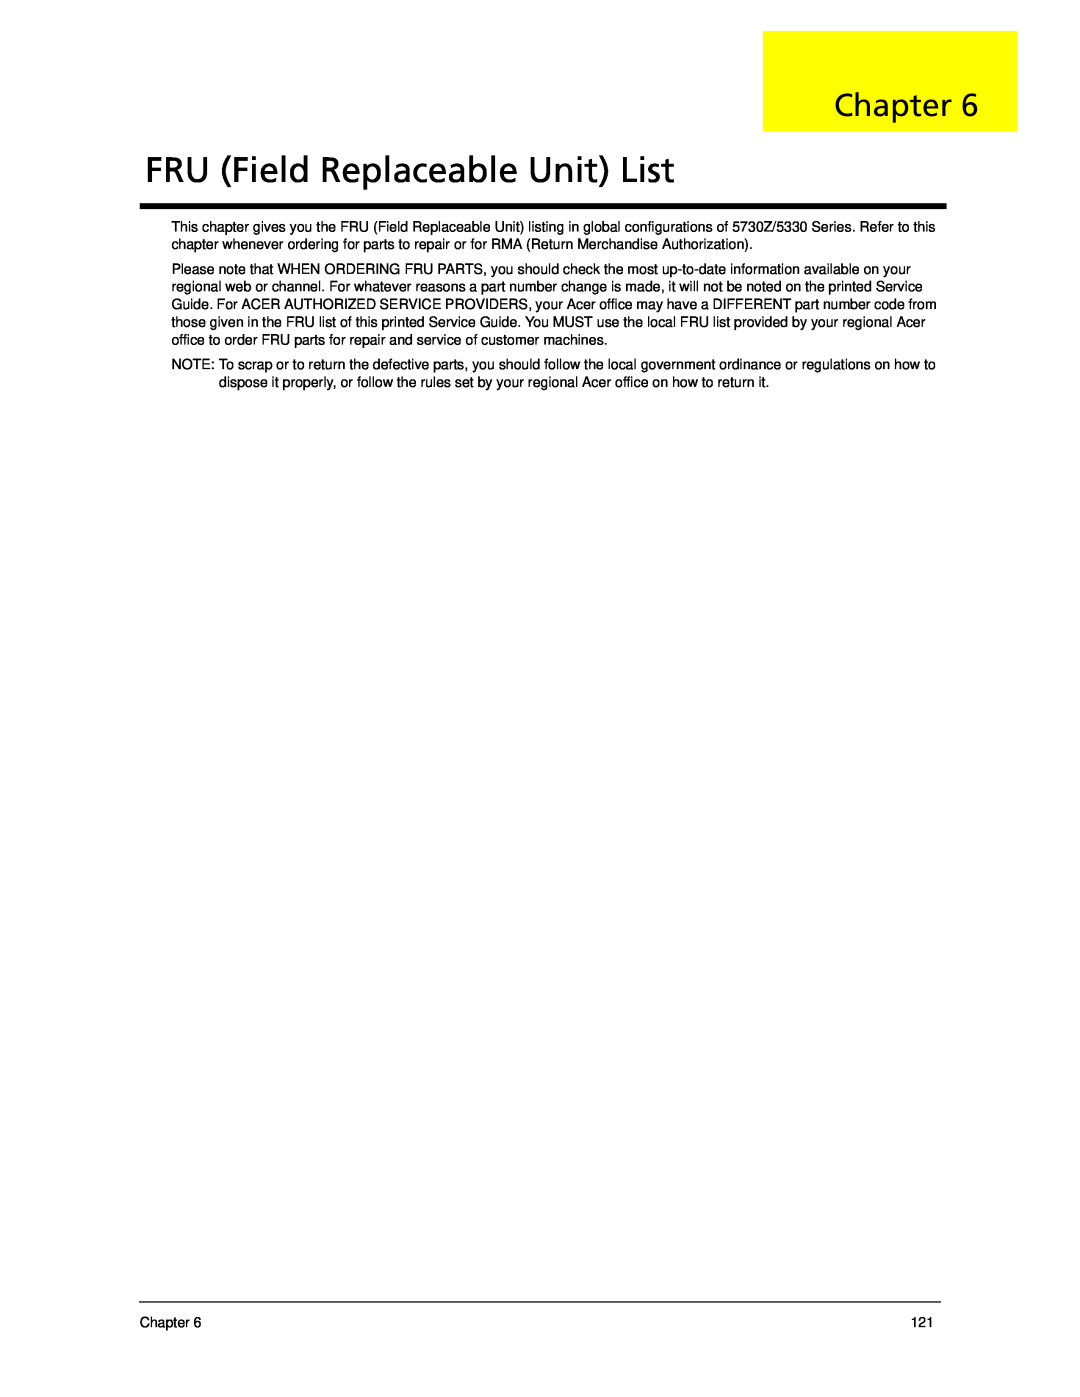 Acer 5330 manual FRU Field Replaceable Unit List, Chapter 